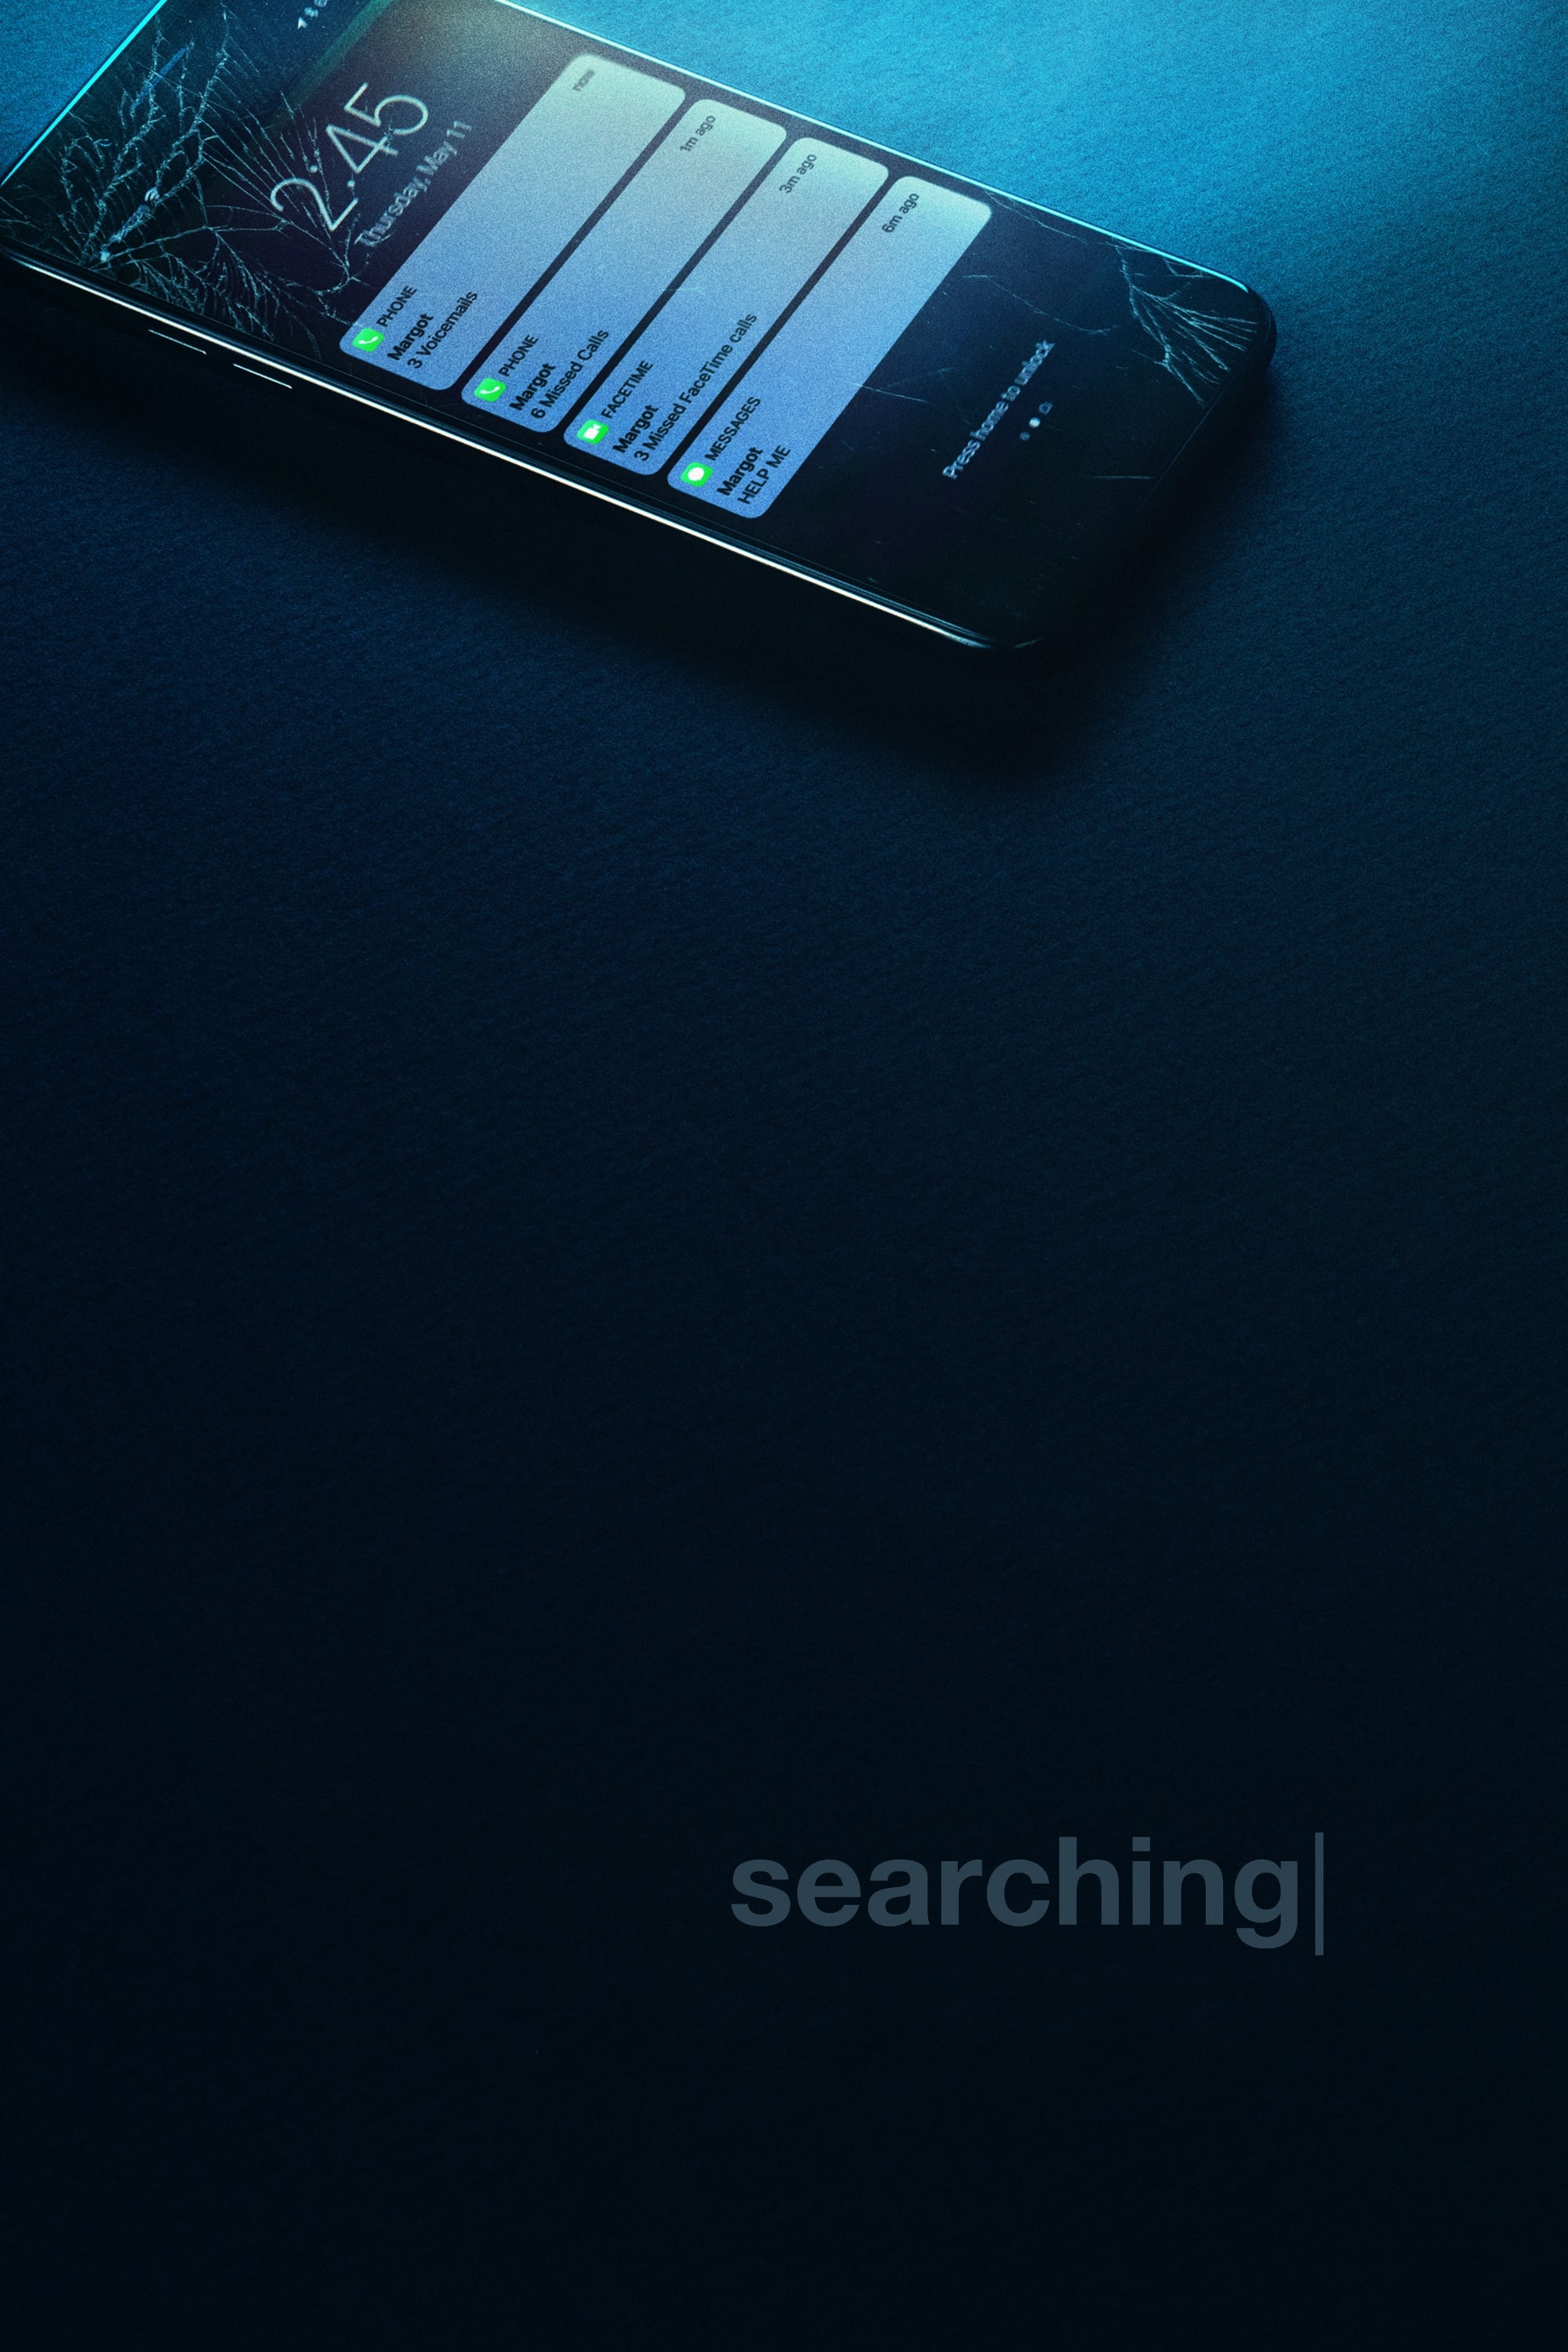 Searching movie poster